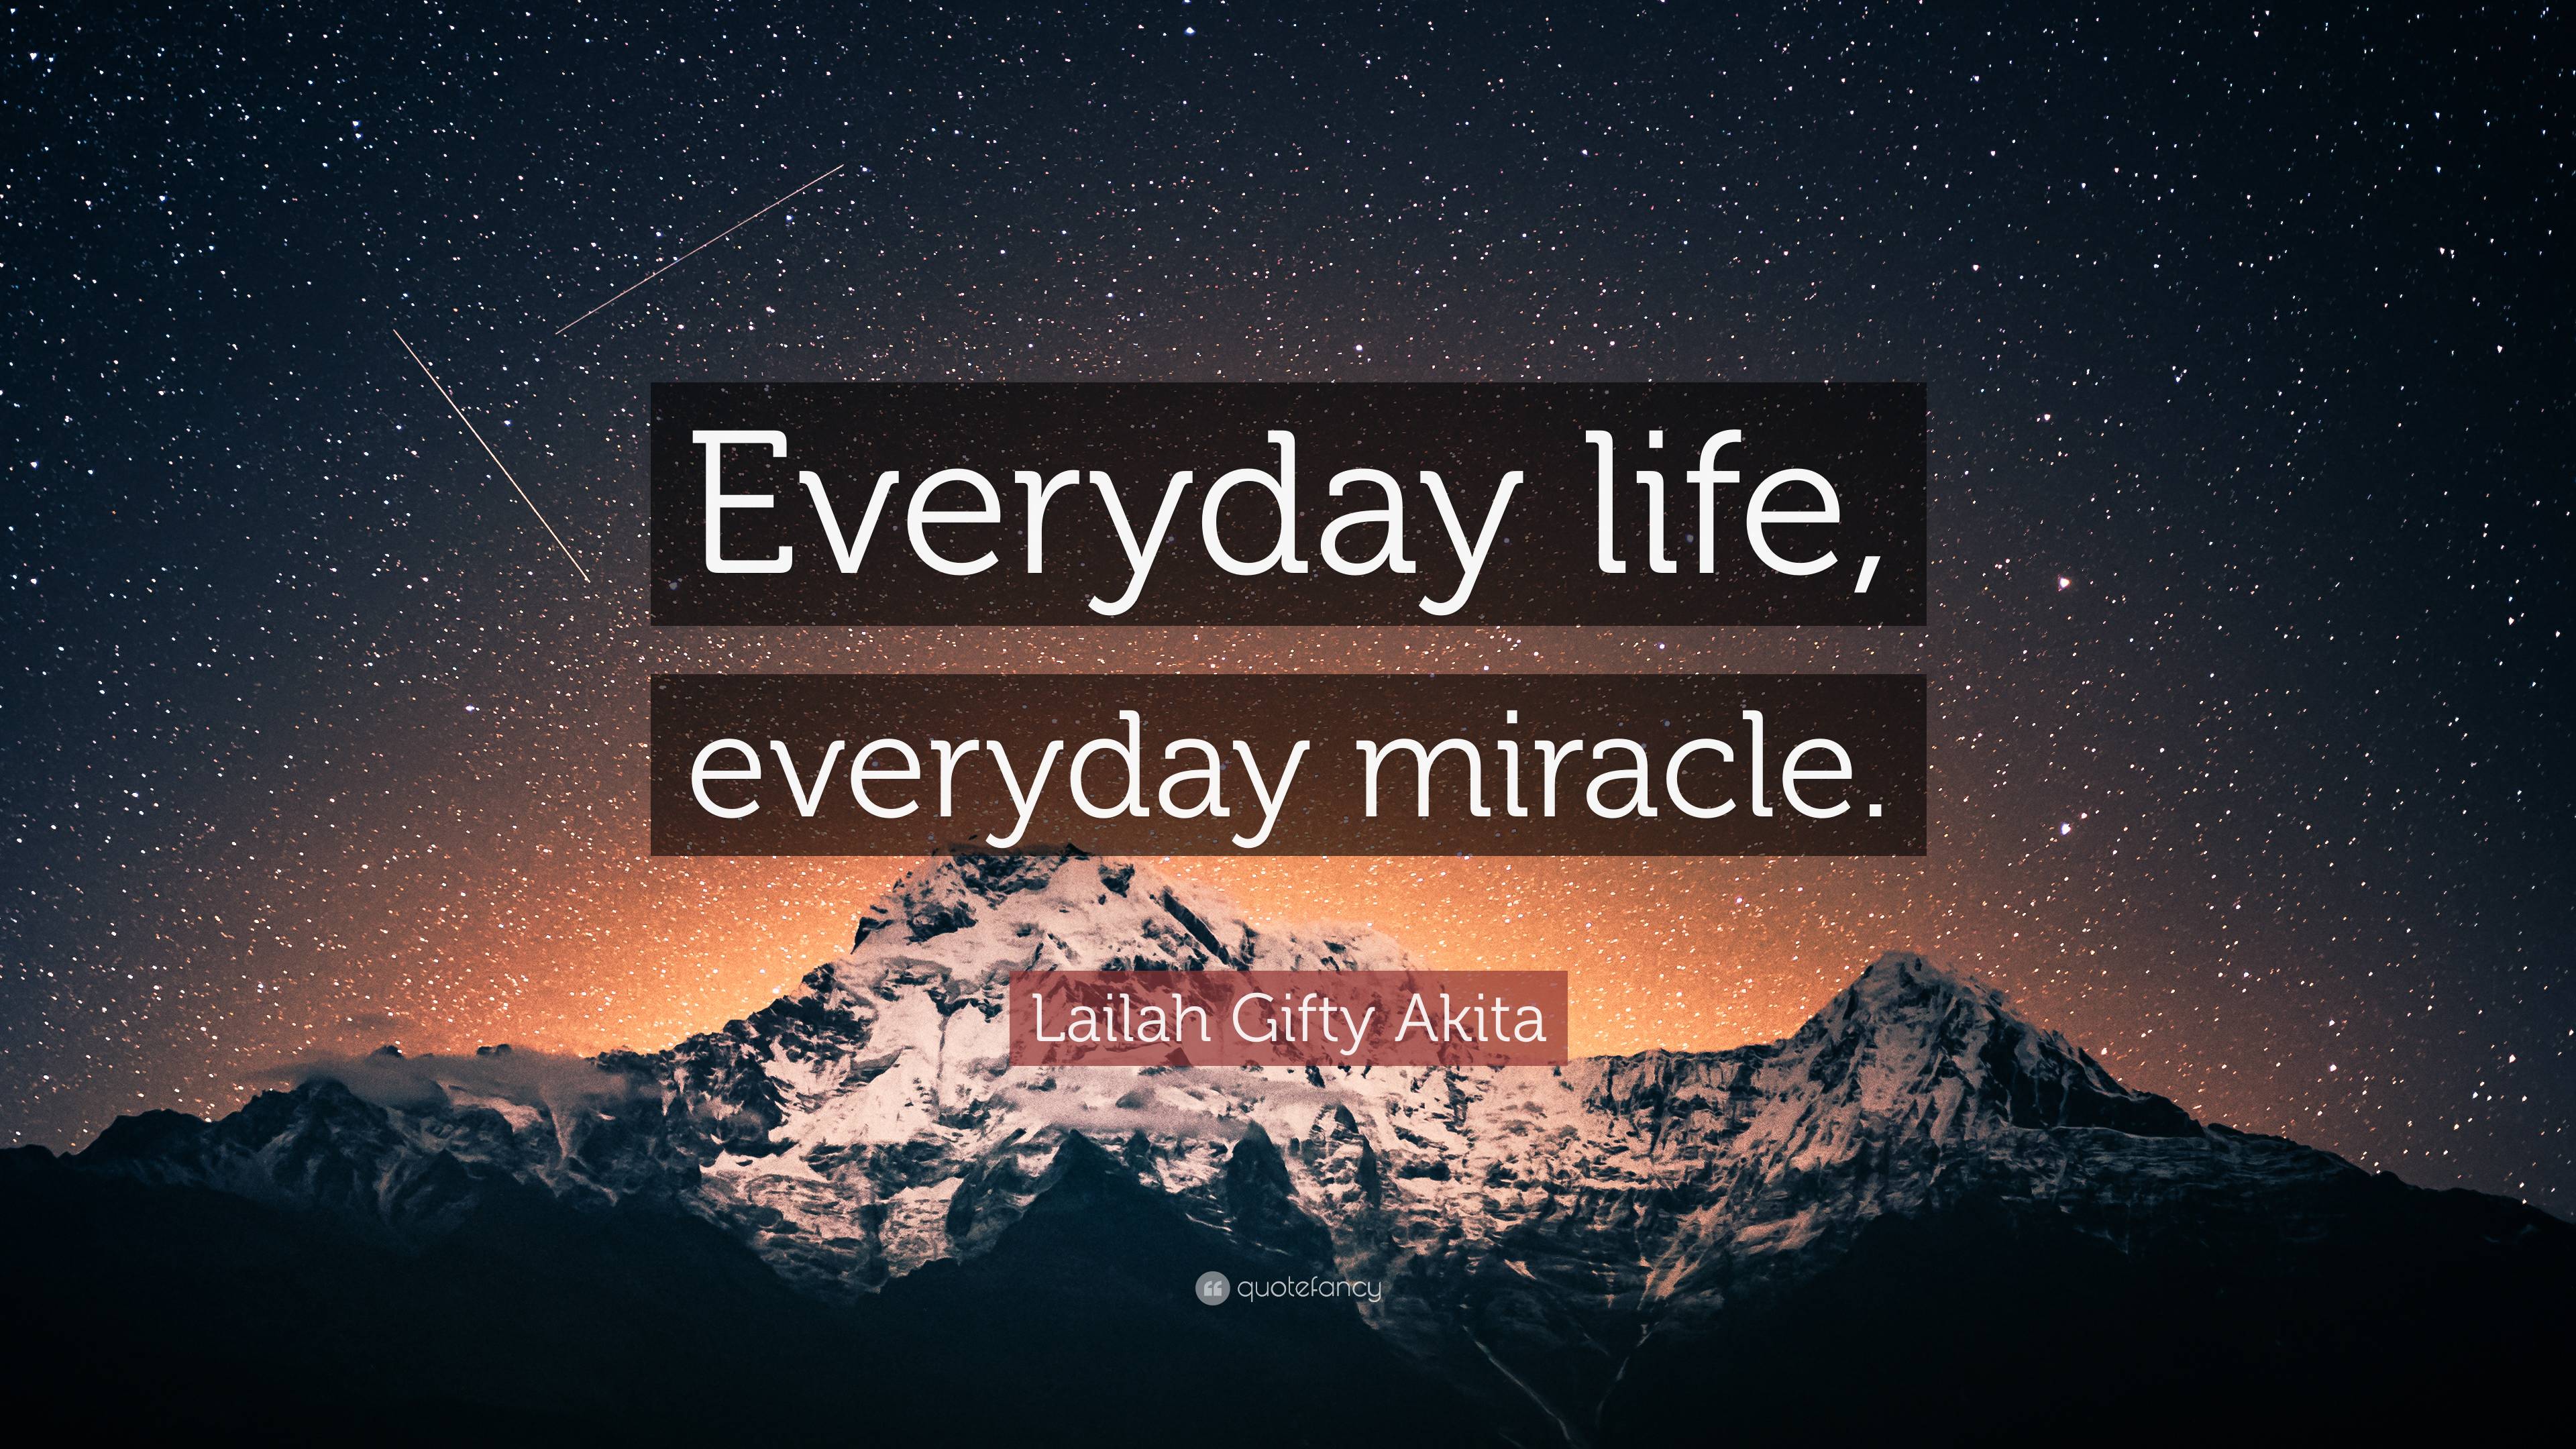 Lailah Gifty Akita Quote: “Everyday life, everyday miracle.”